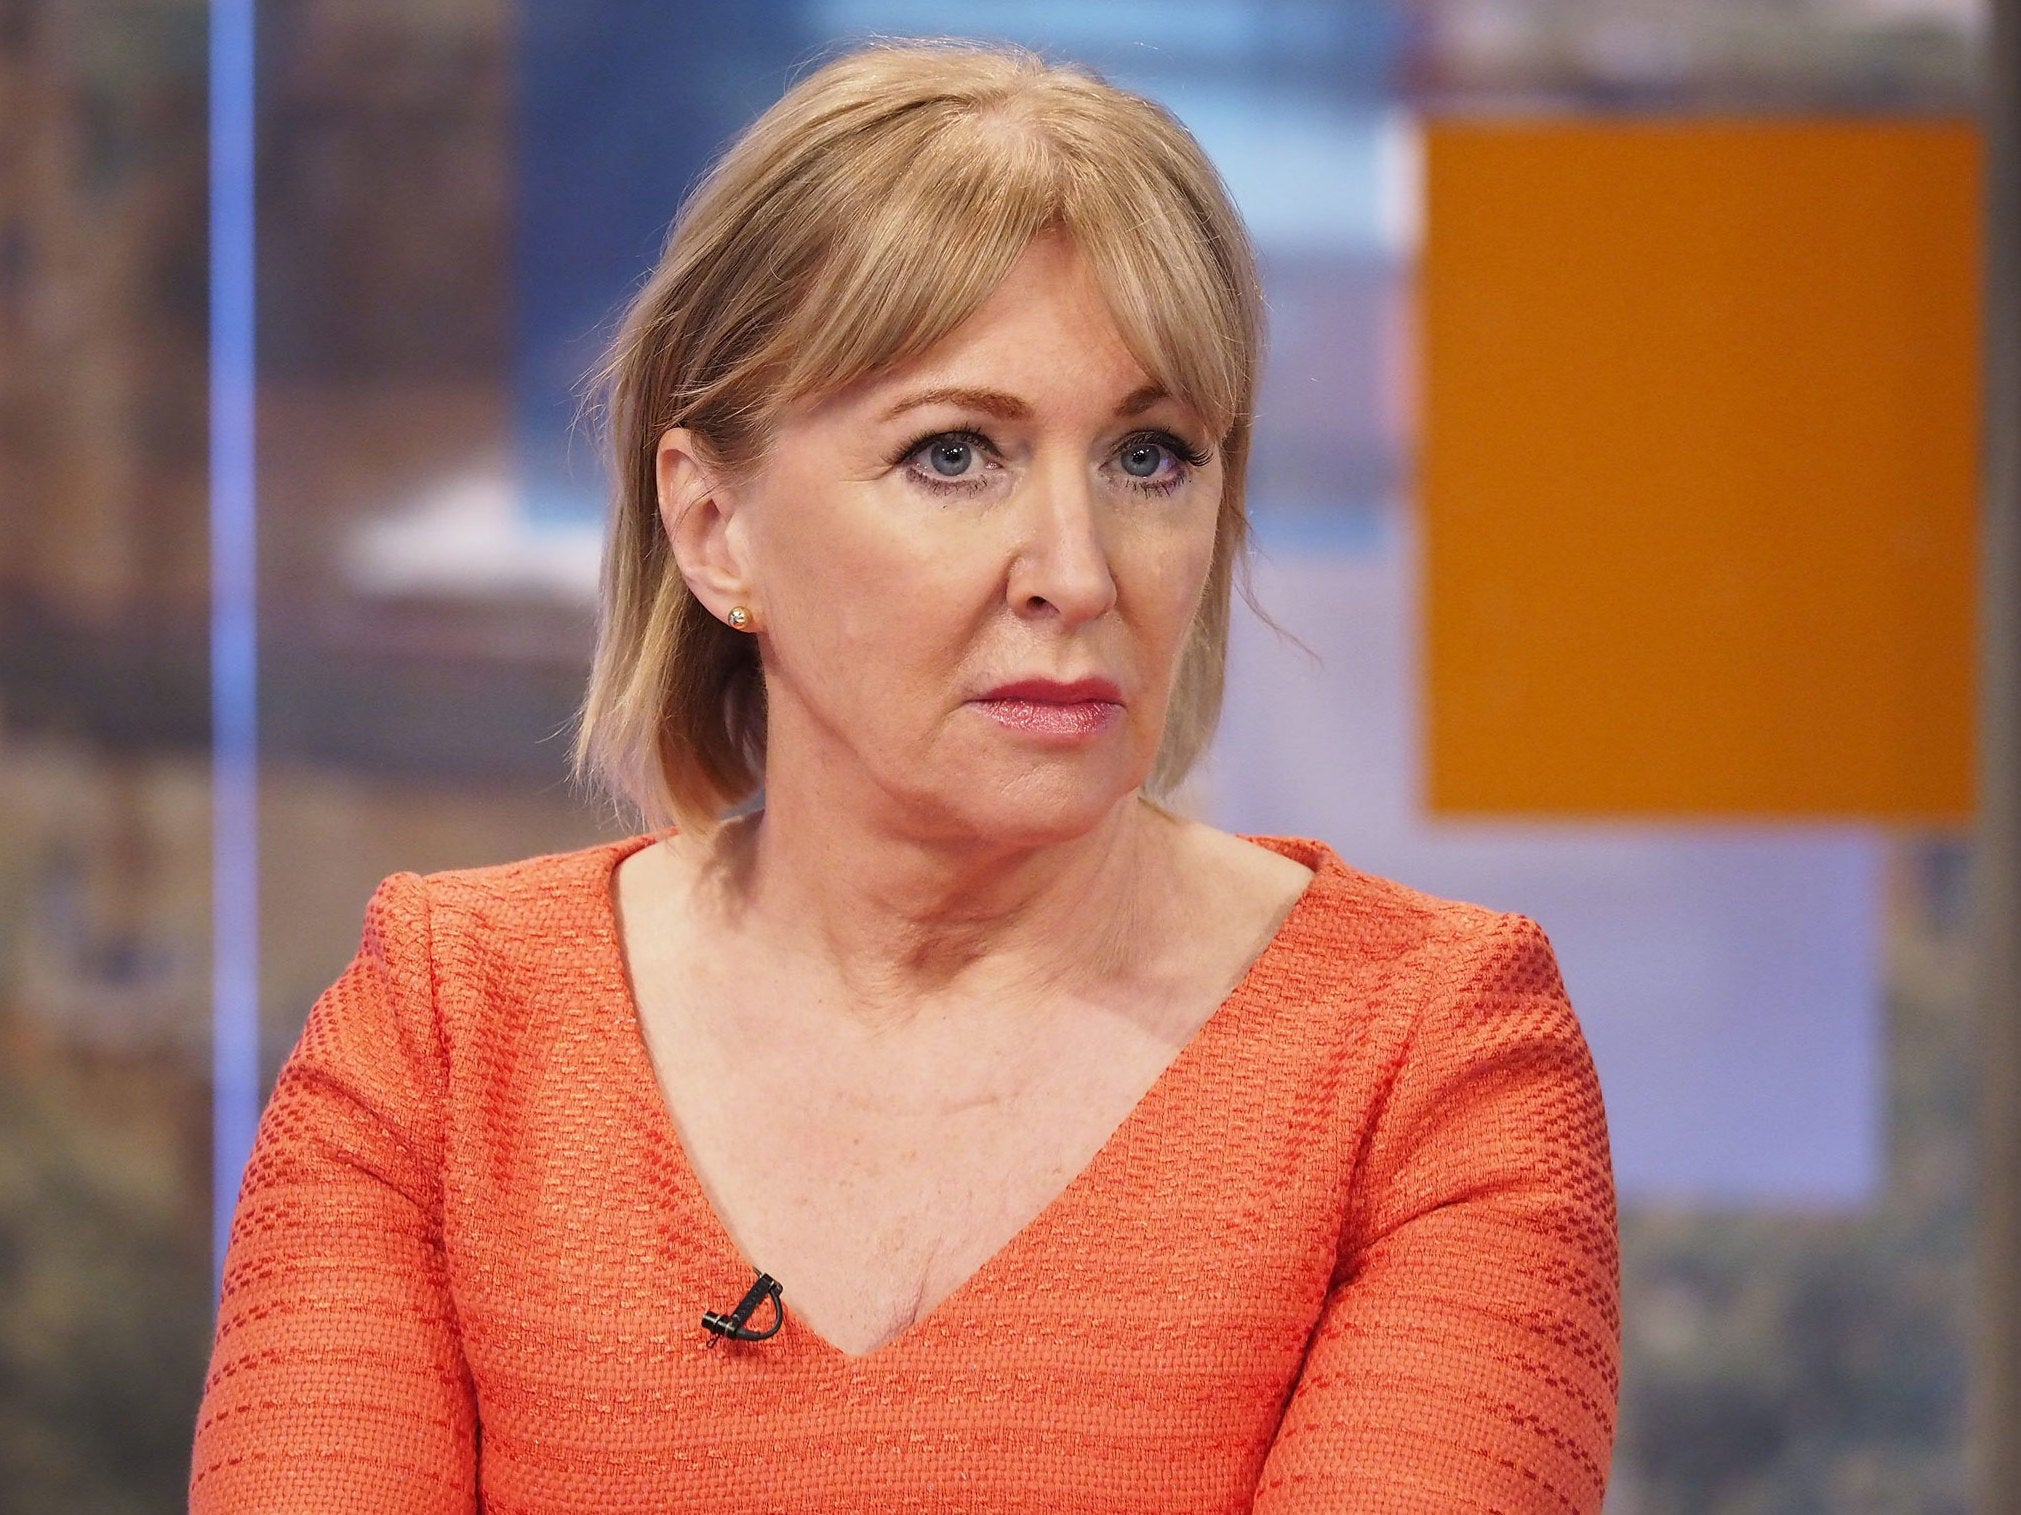 Nadine Dorries revealed she shares her computer passwords with all her staff - including interns